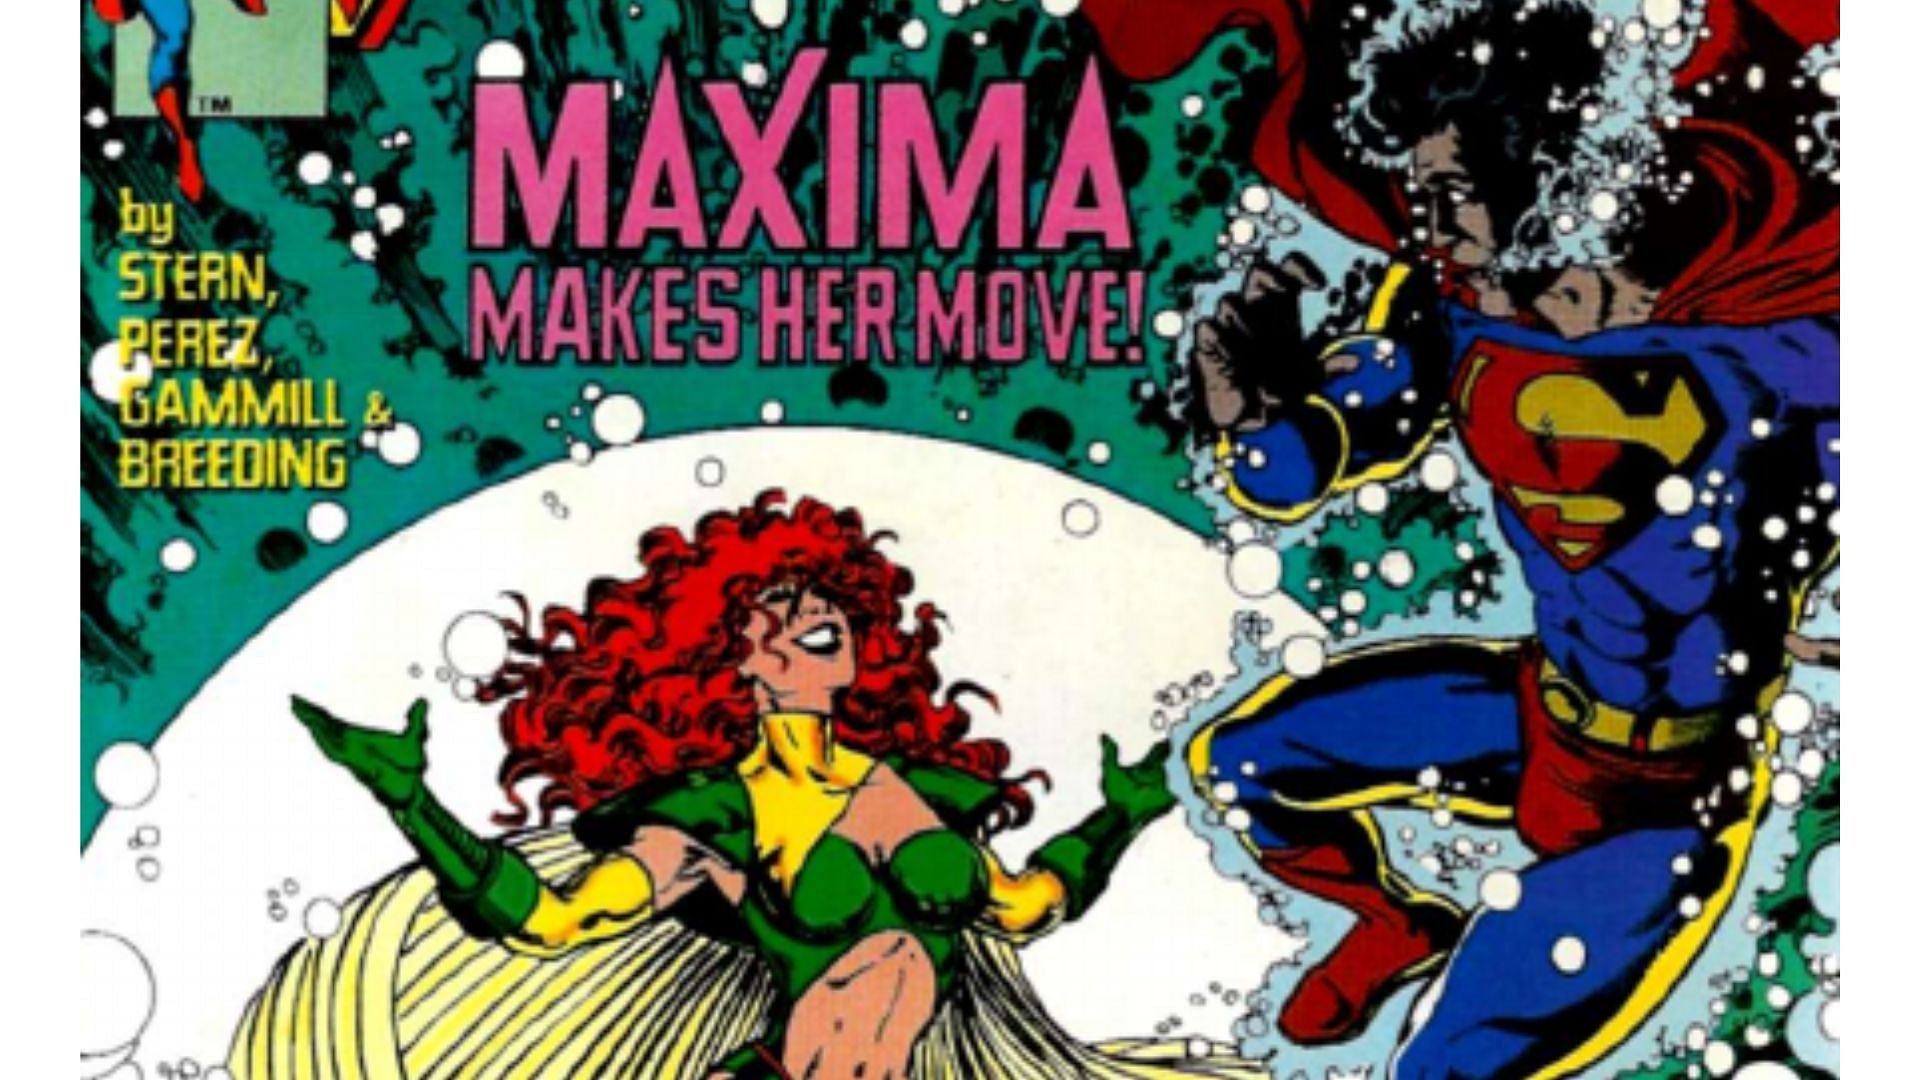 Maxima was a despot who was rejected by Superman (Image via DC comics)